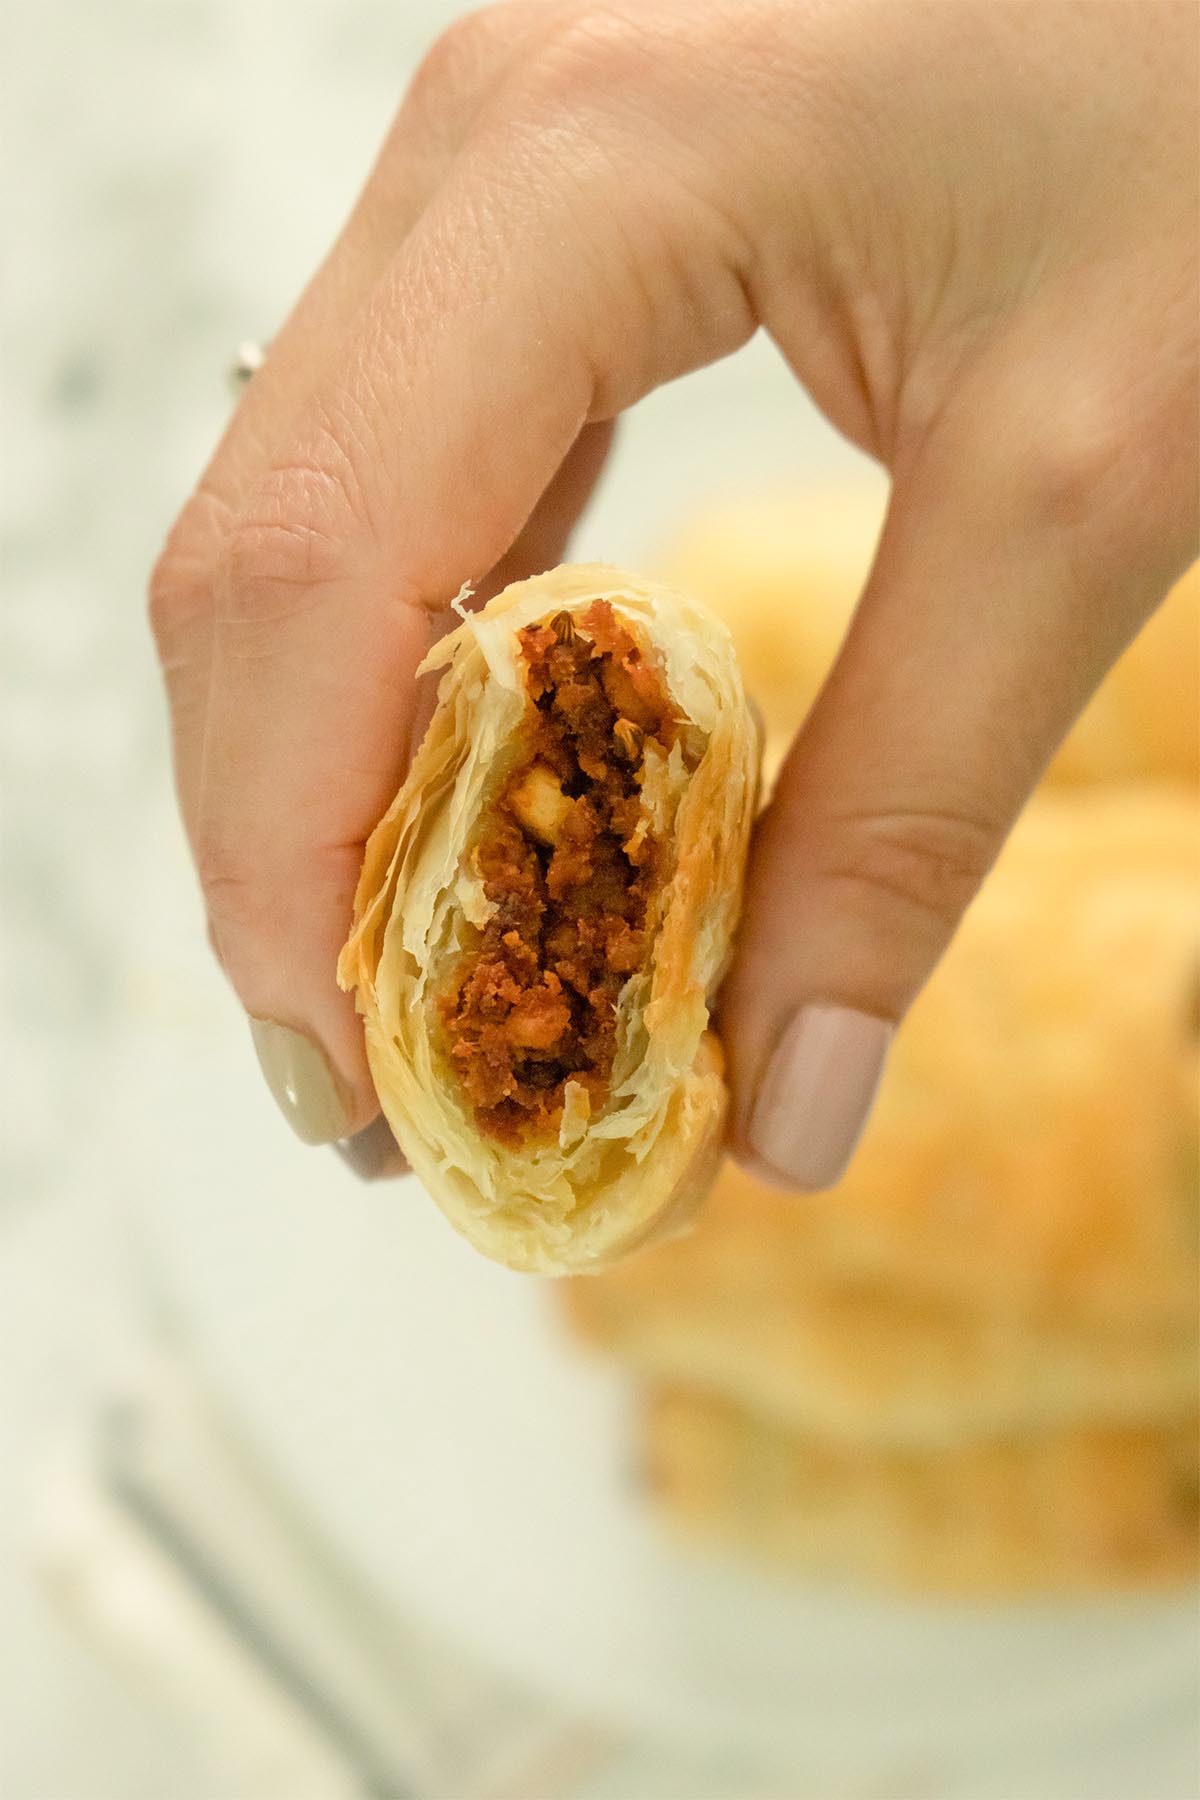 close-up of a hand holding a vegan sausage roll with a bite taken out of it